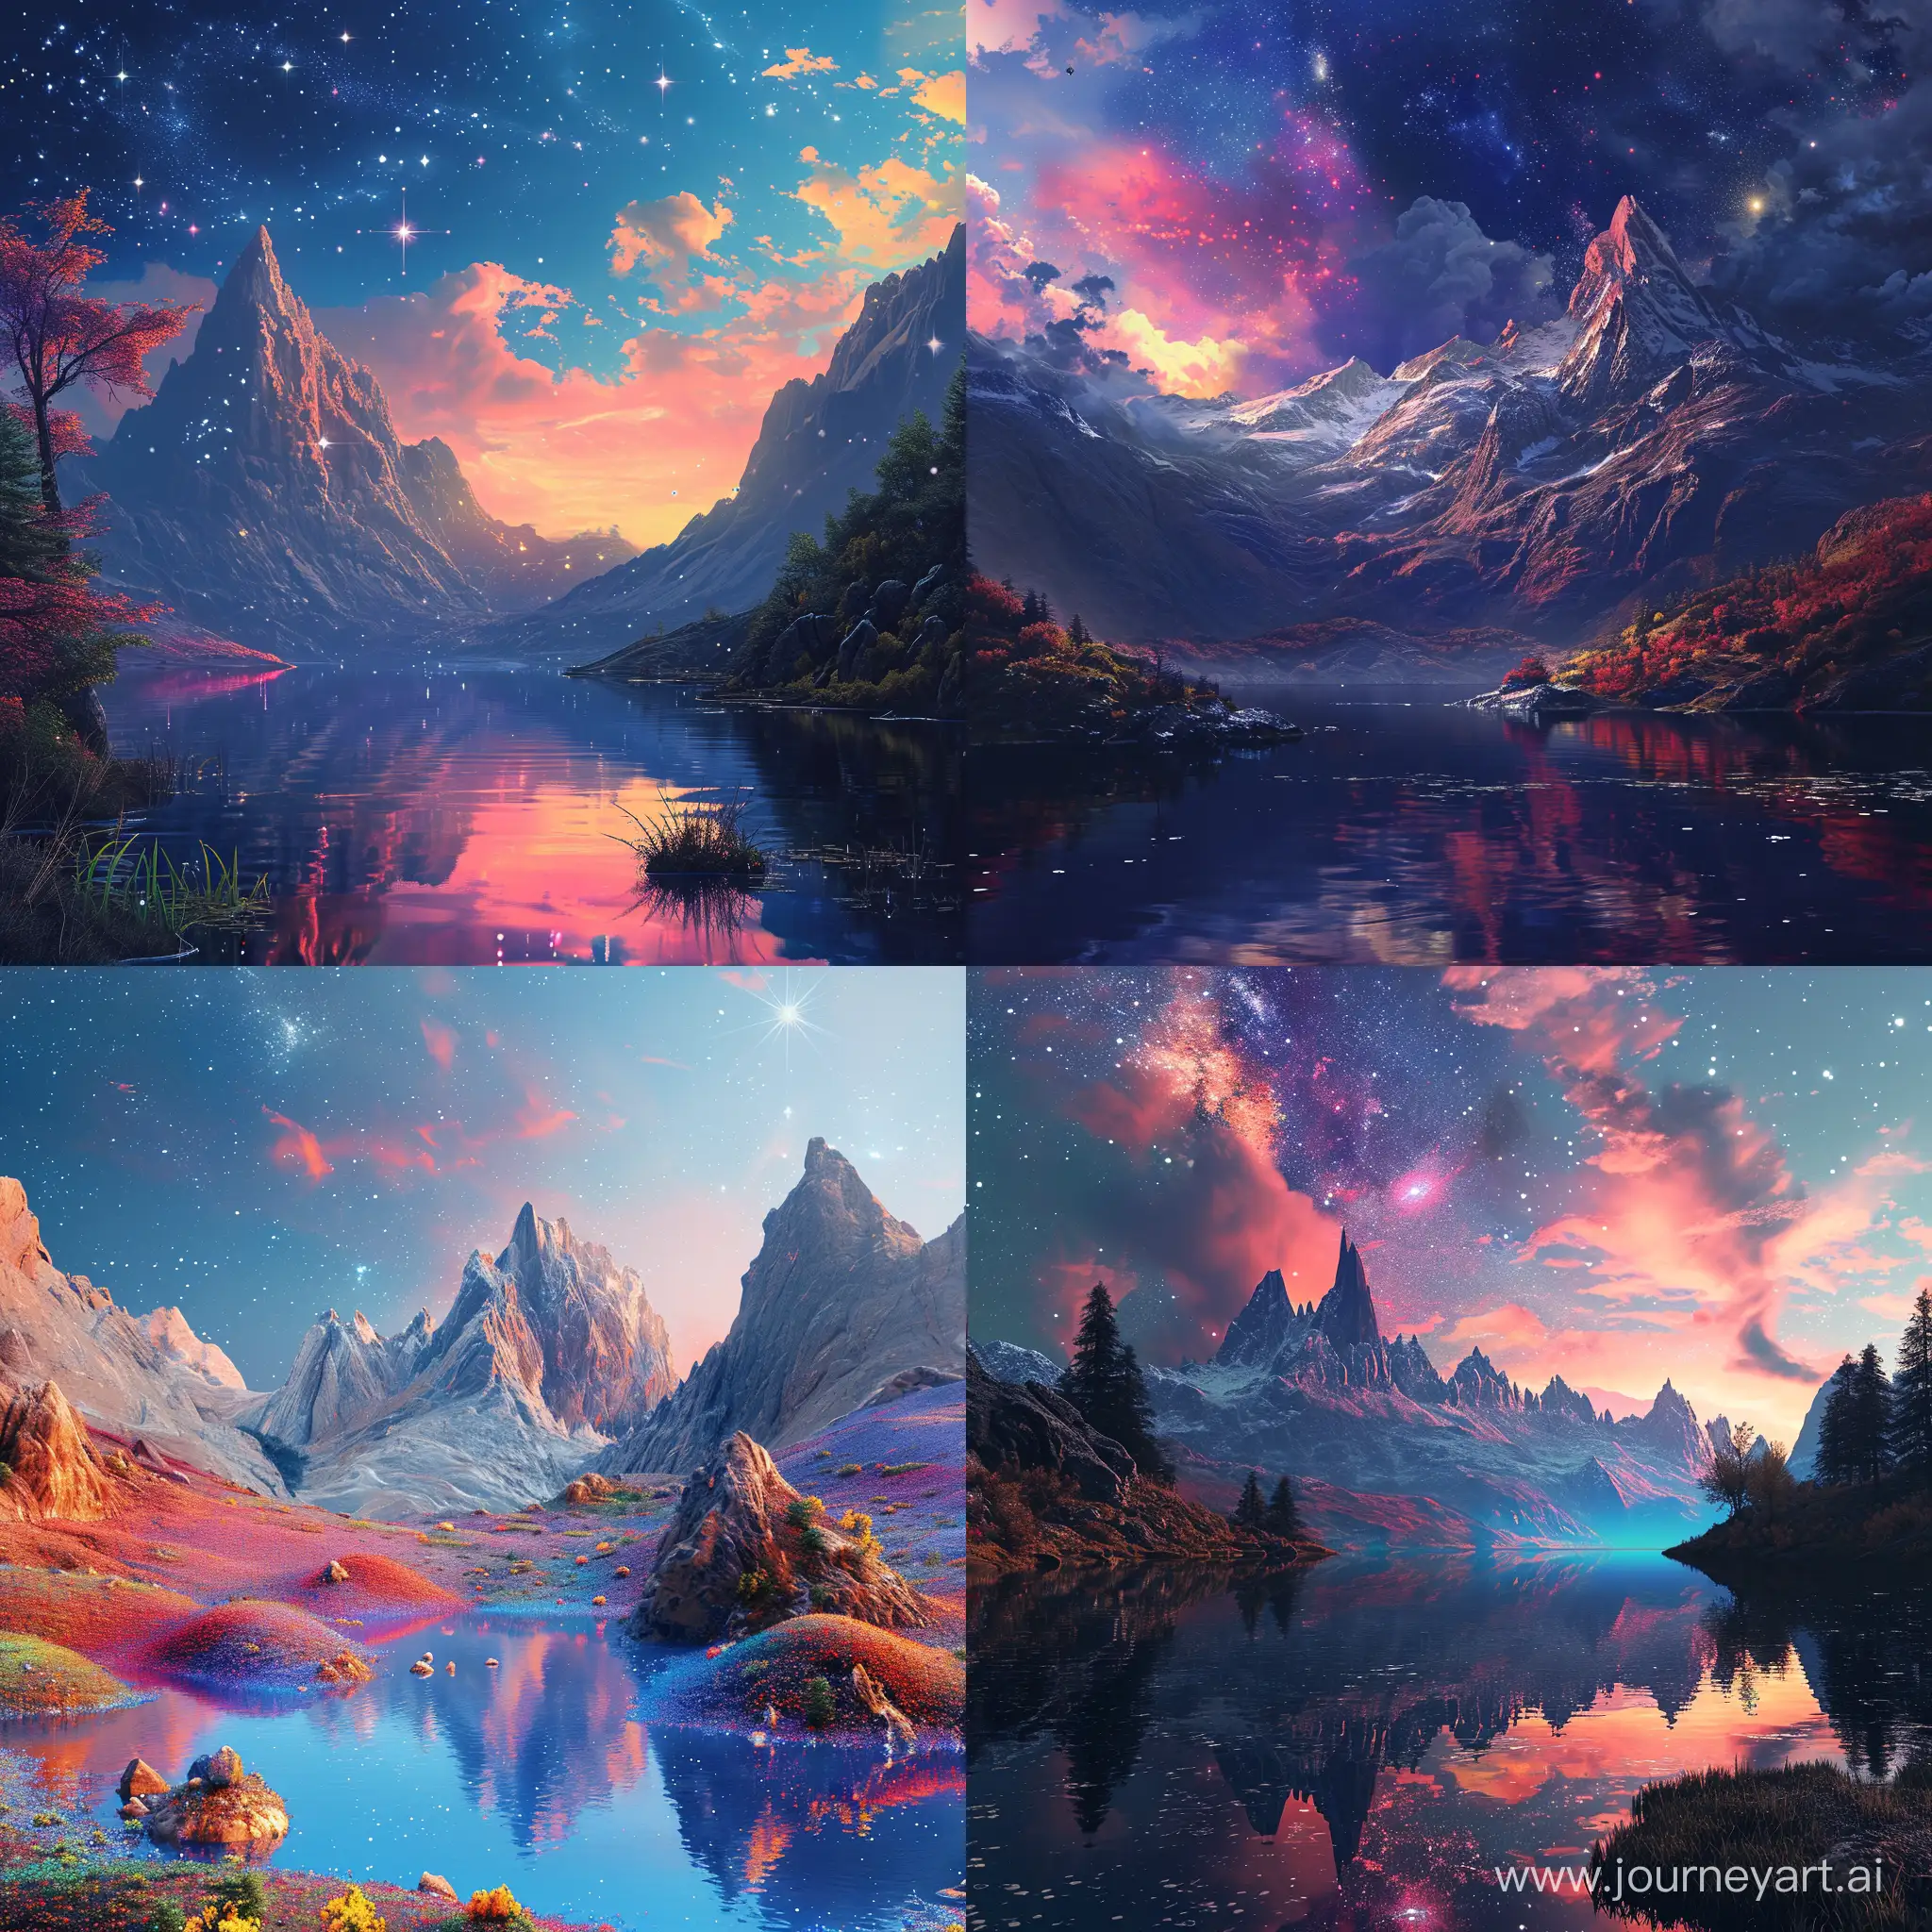 A colorful, fantastical landscape with mountains, a lake, and stars in the sky, realism::1.2, 8K, photorealistic::1.2